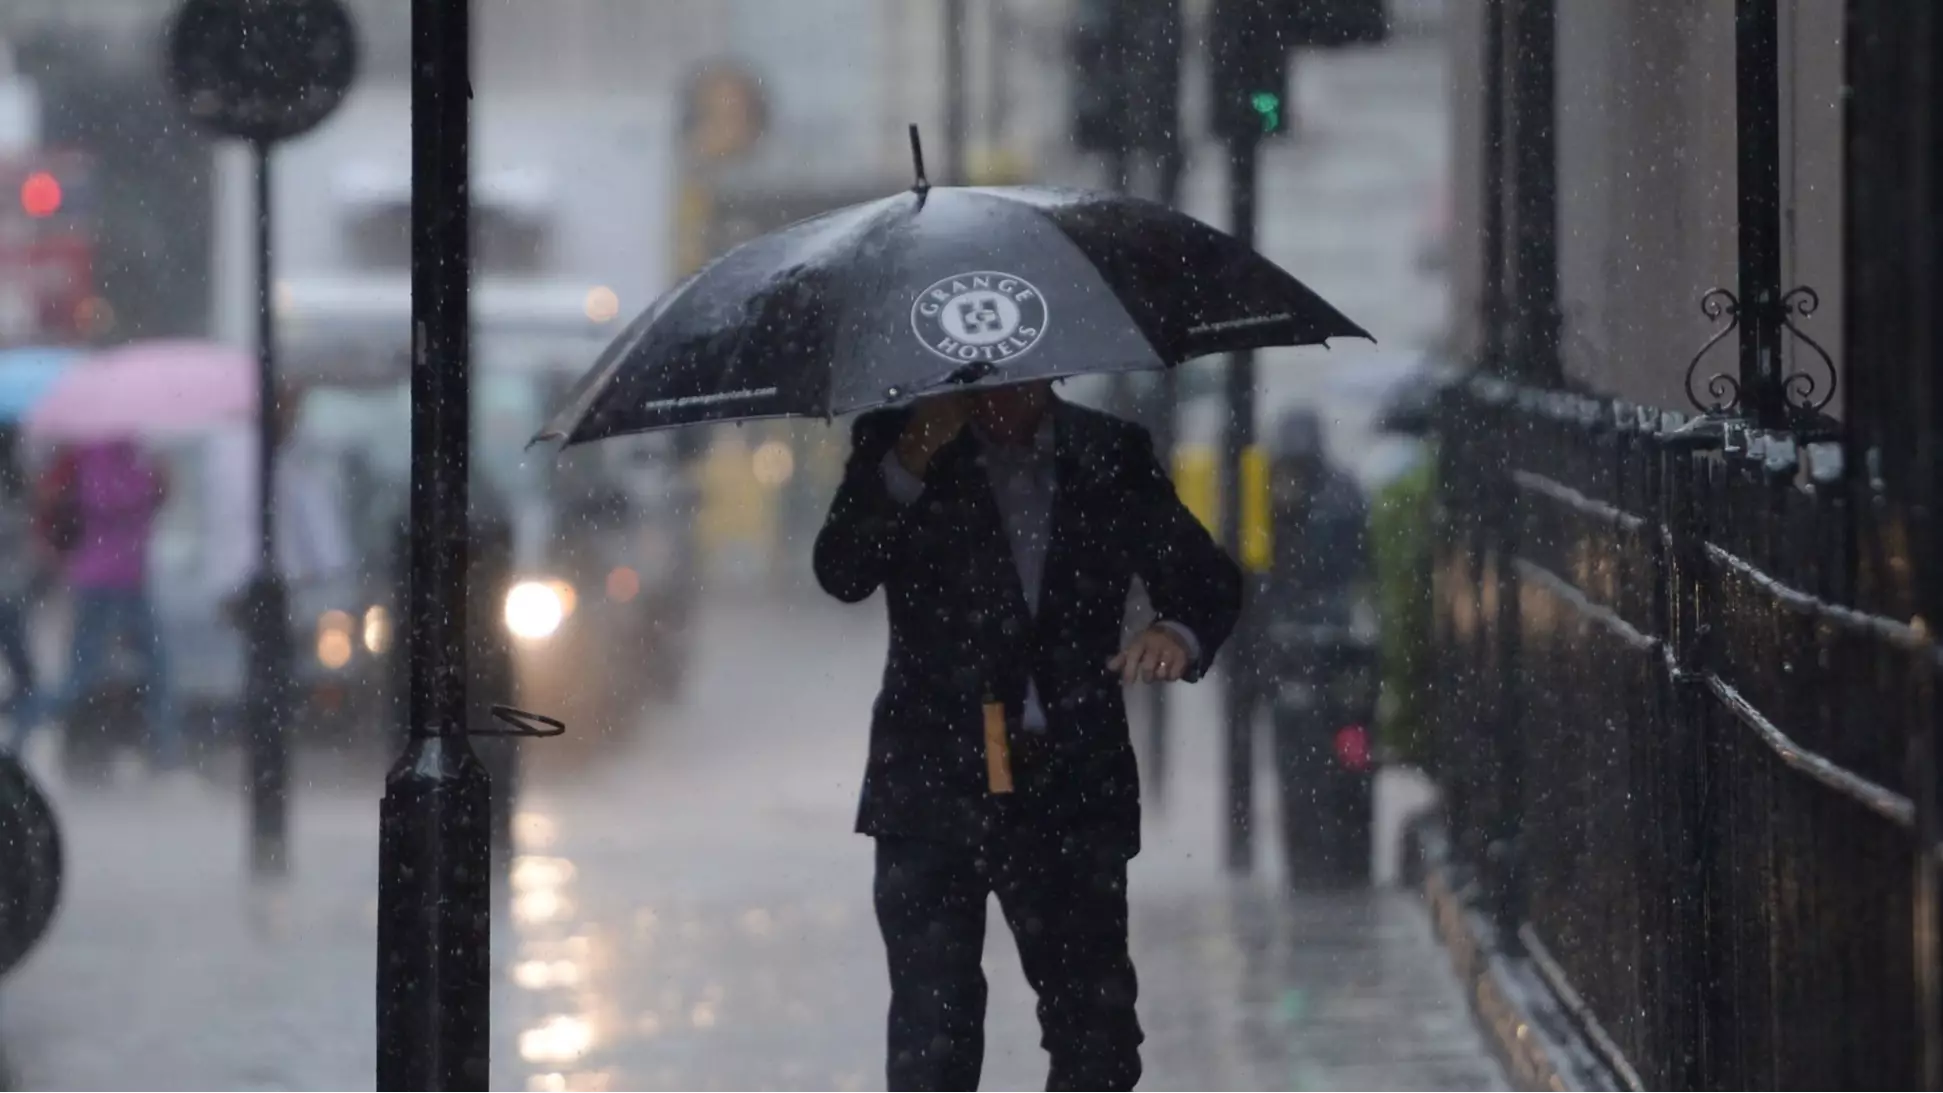 Severe Flooding And Storms Expected As Tail End Of Hurricane Humberto Batters The UK